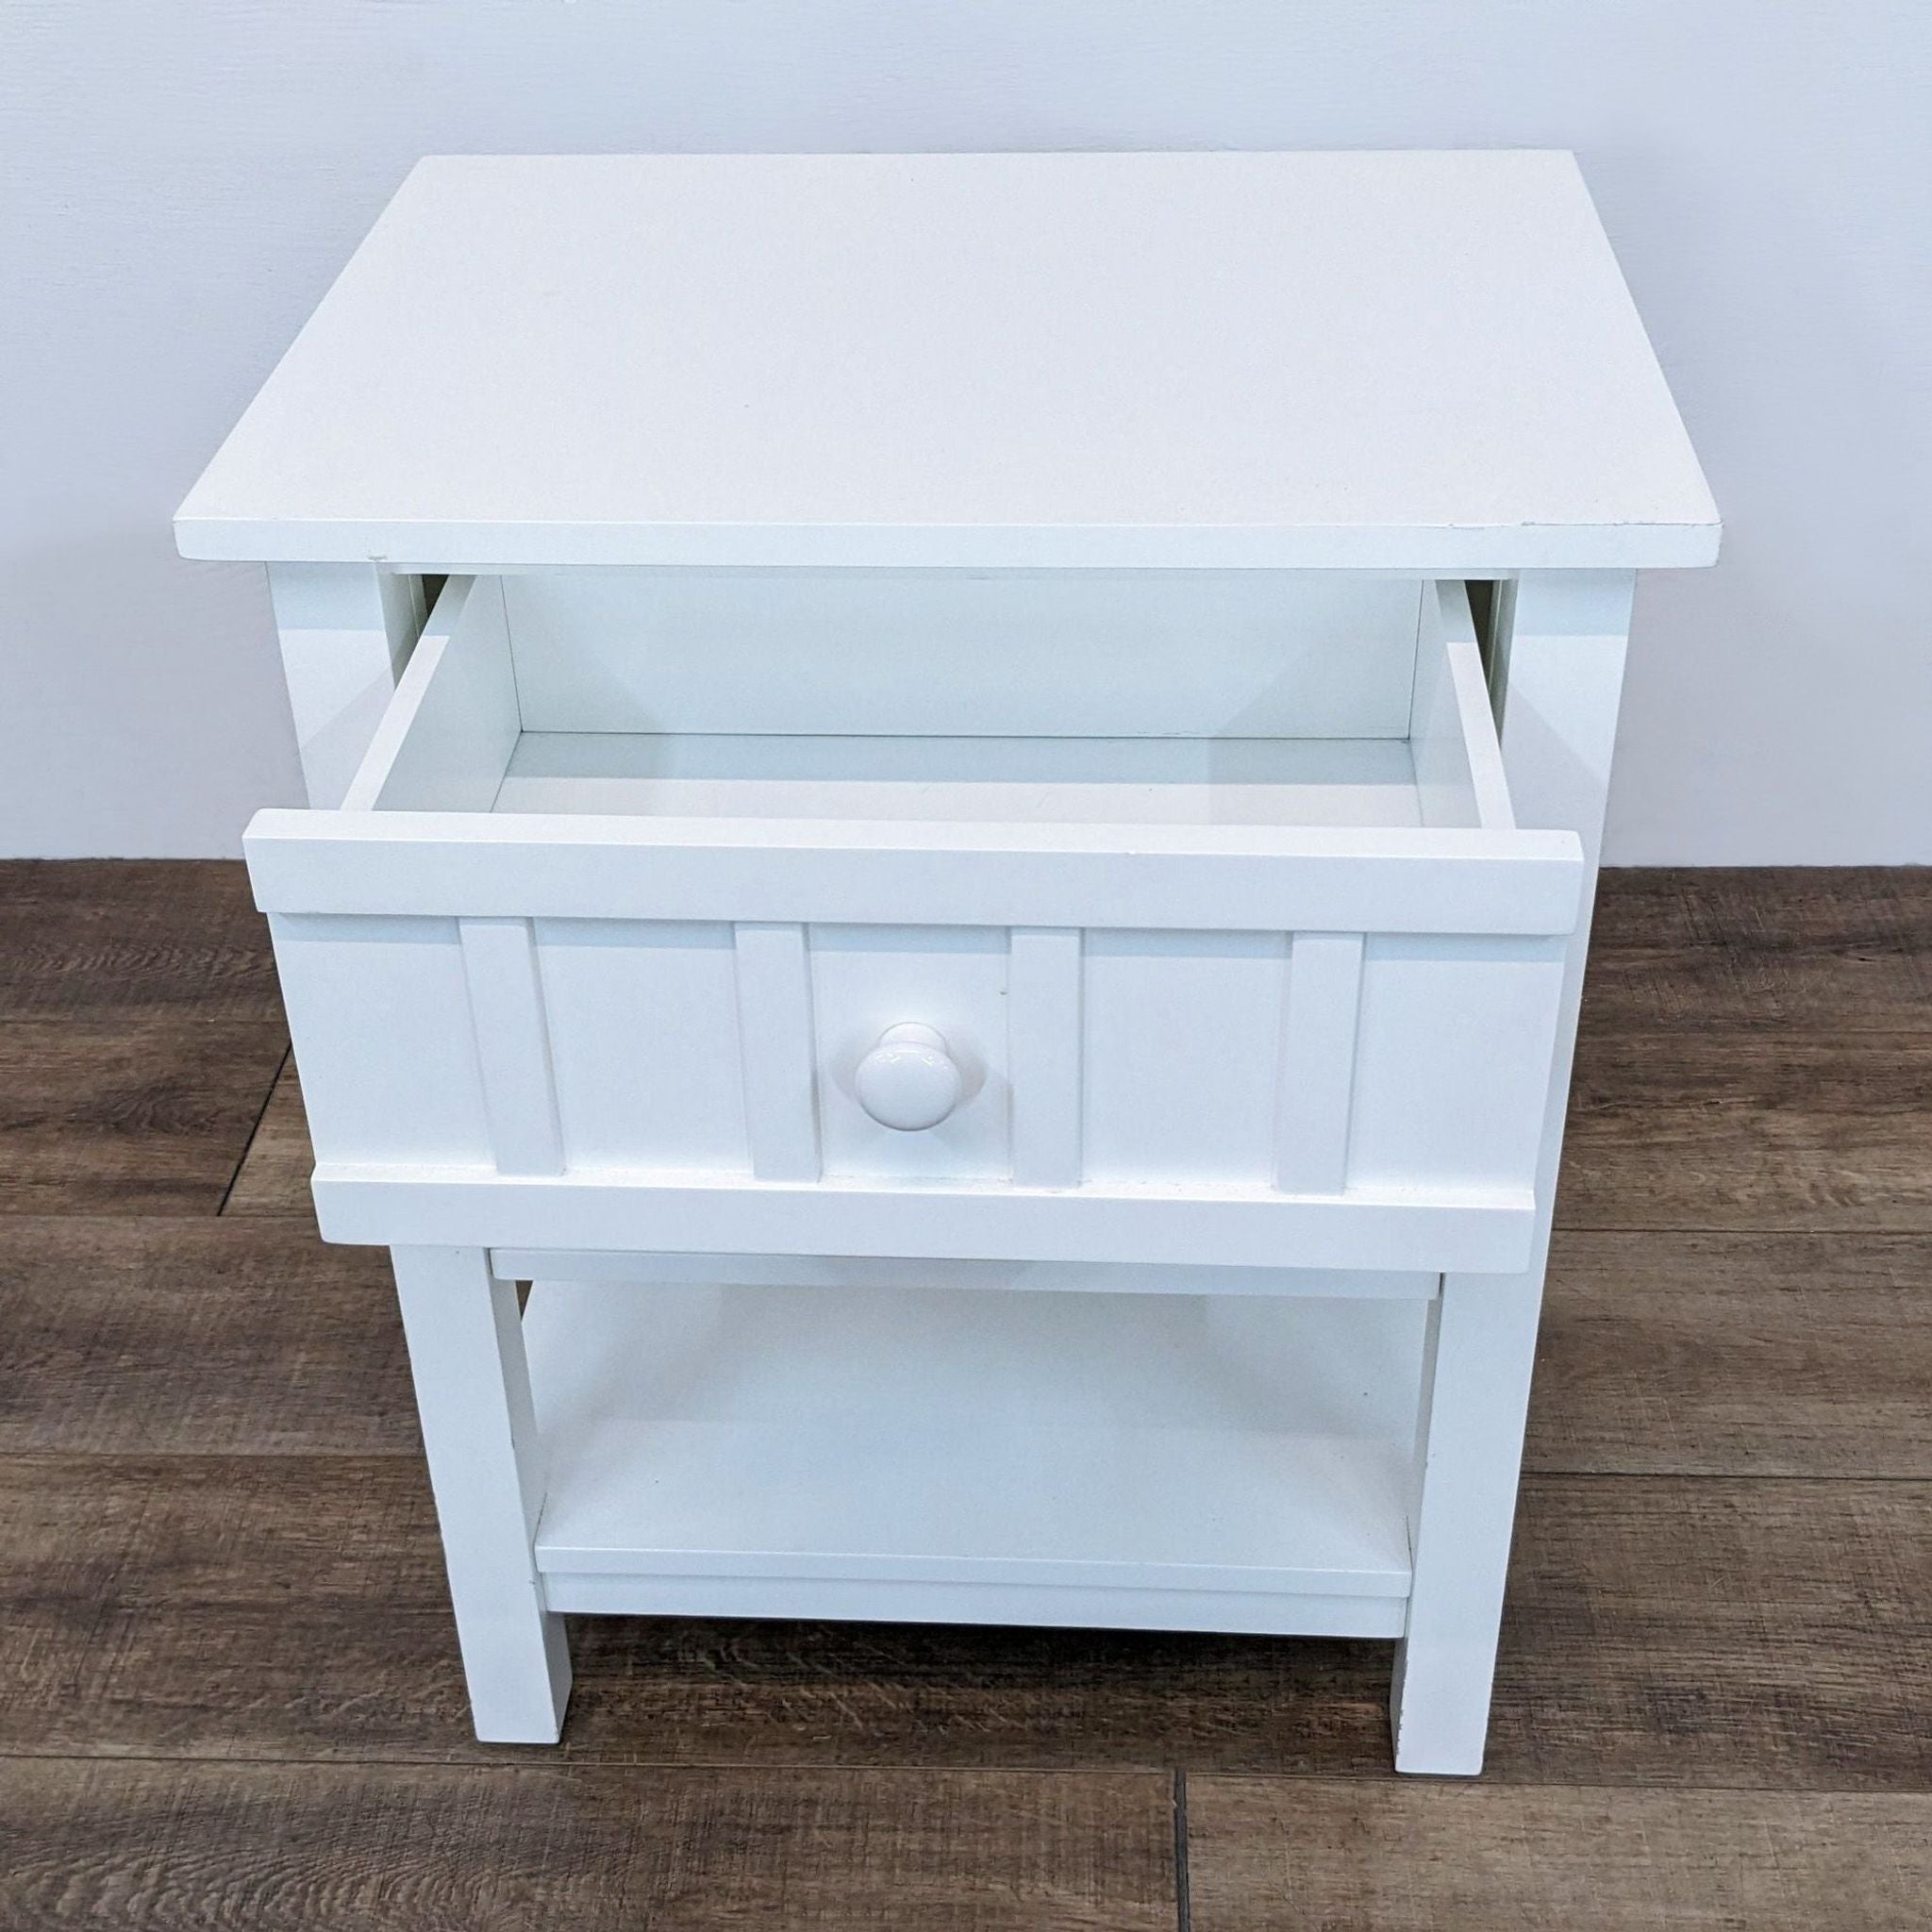 2. A white Crate & Barrel end table, drawer slightly open, revealing storage space, on hardwood flooring.